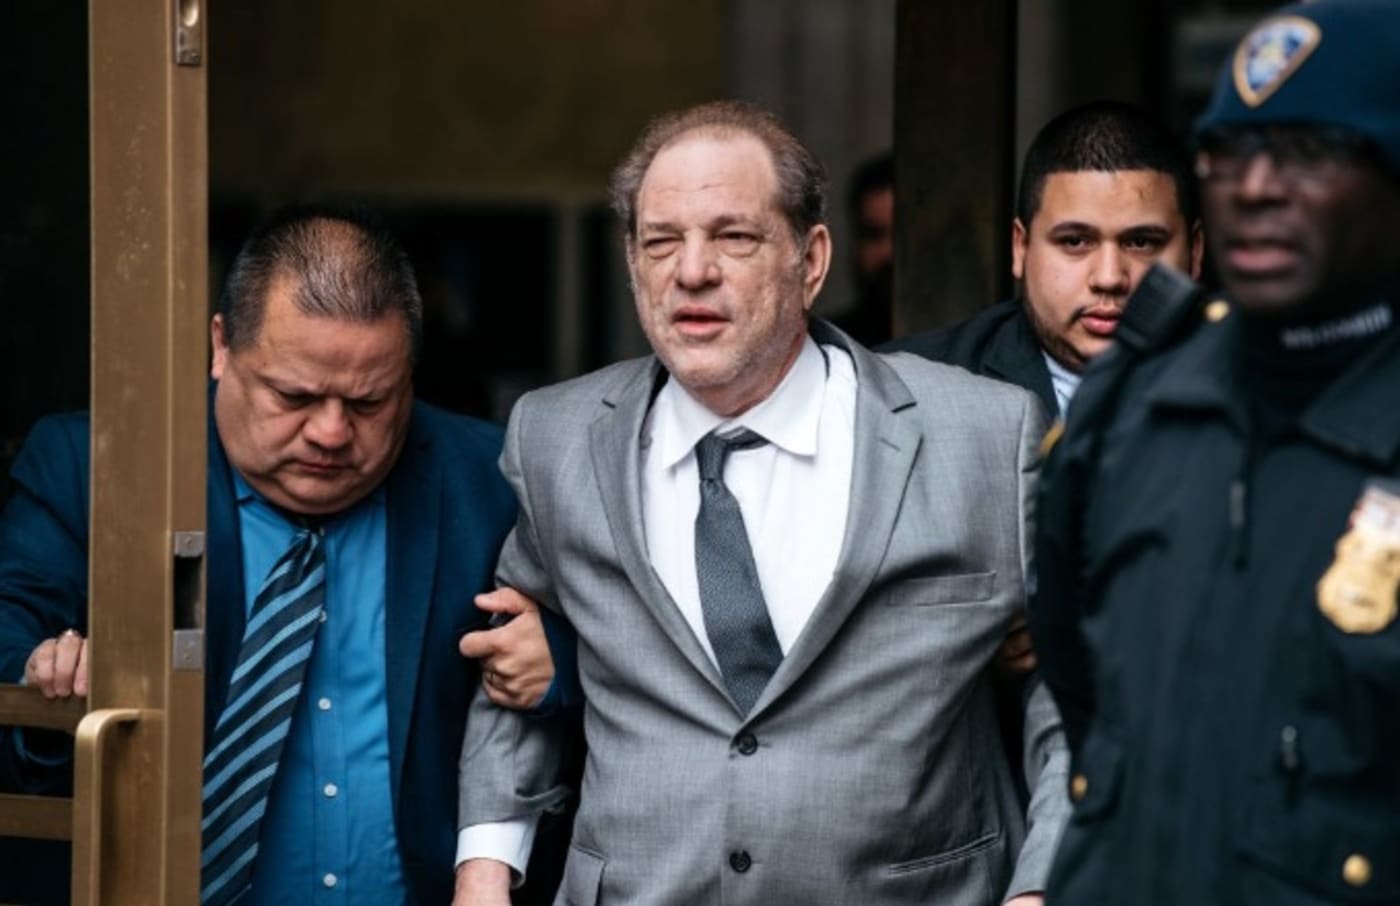 Disgraced Producer Harvey Weinstein Struggles To Walk At Court Appearance Ahead Of Trial Complex